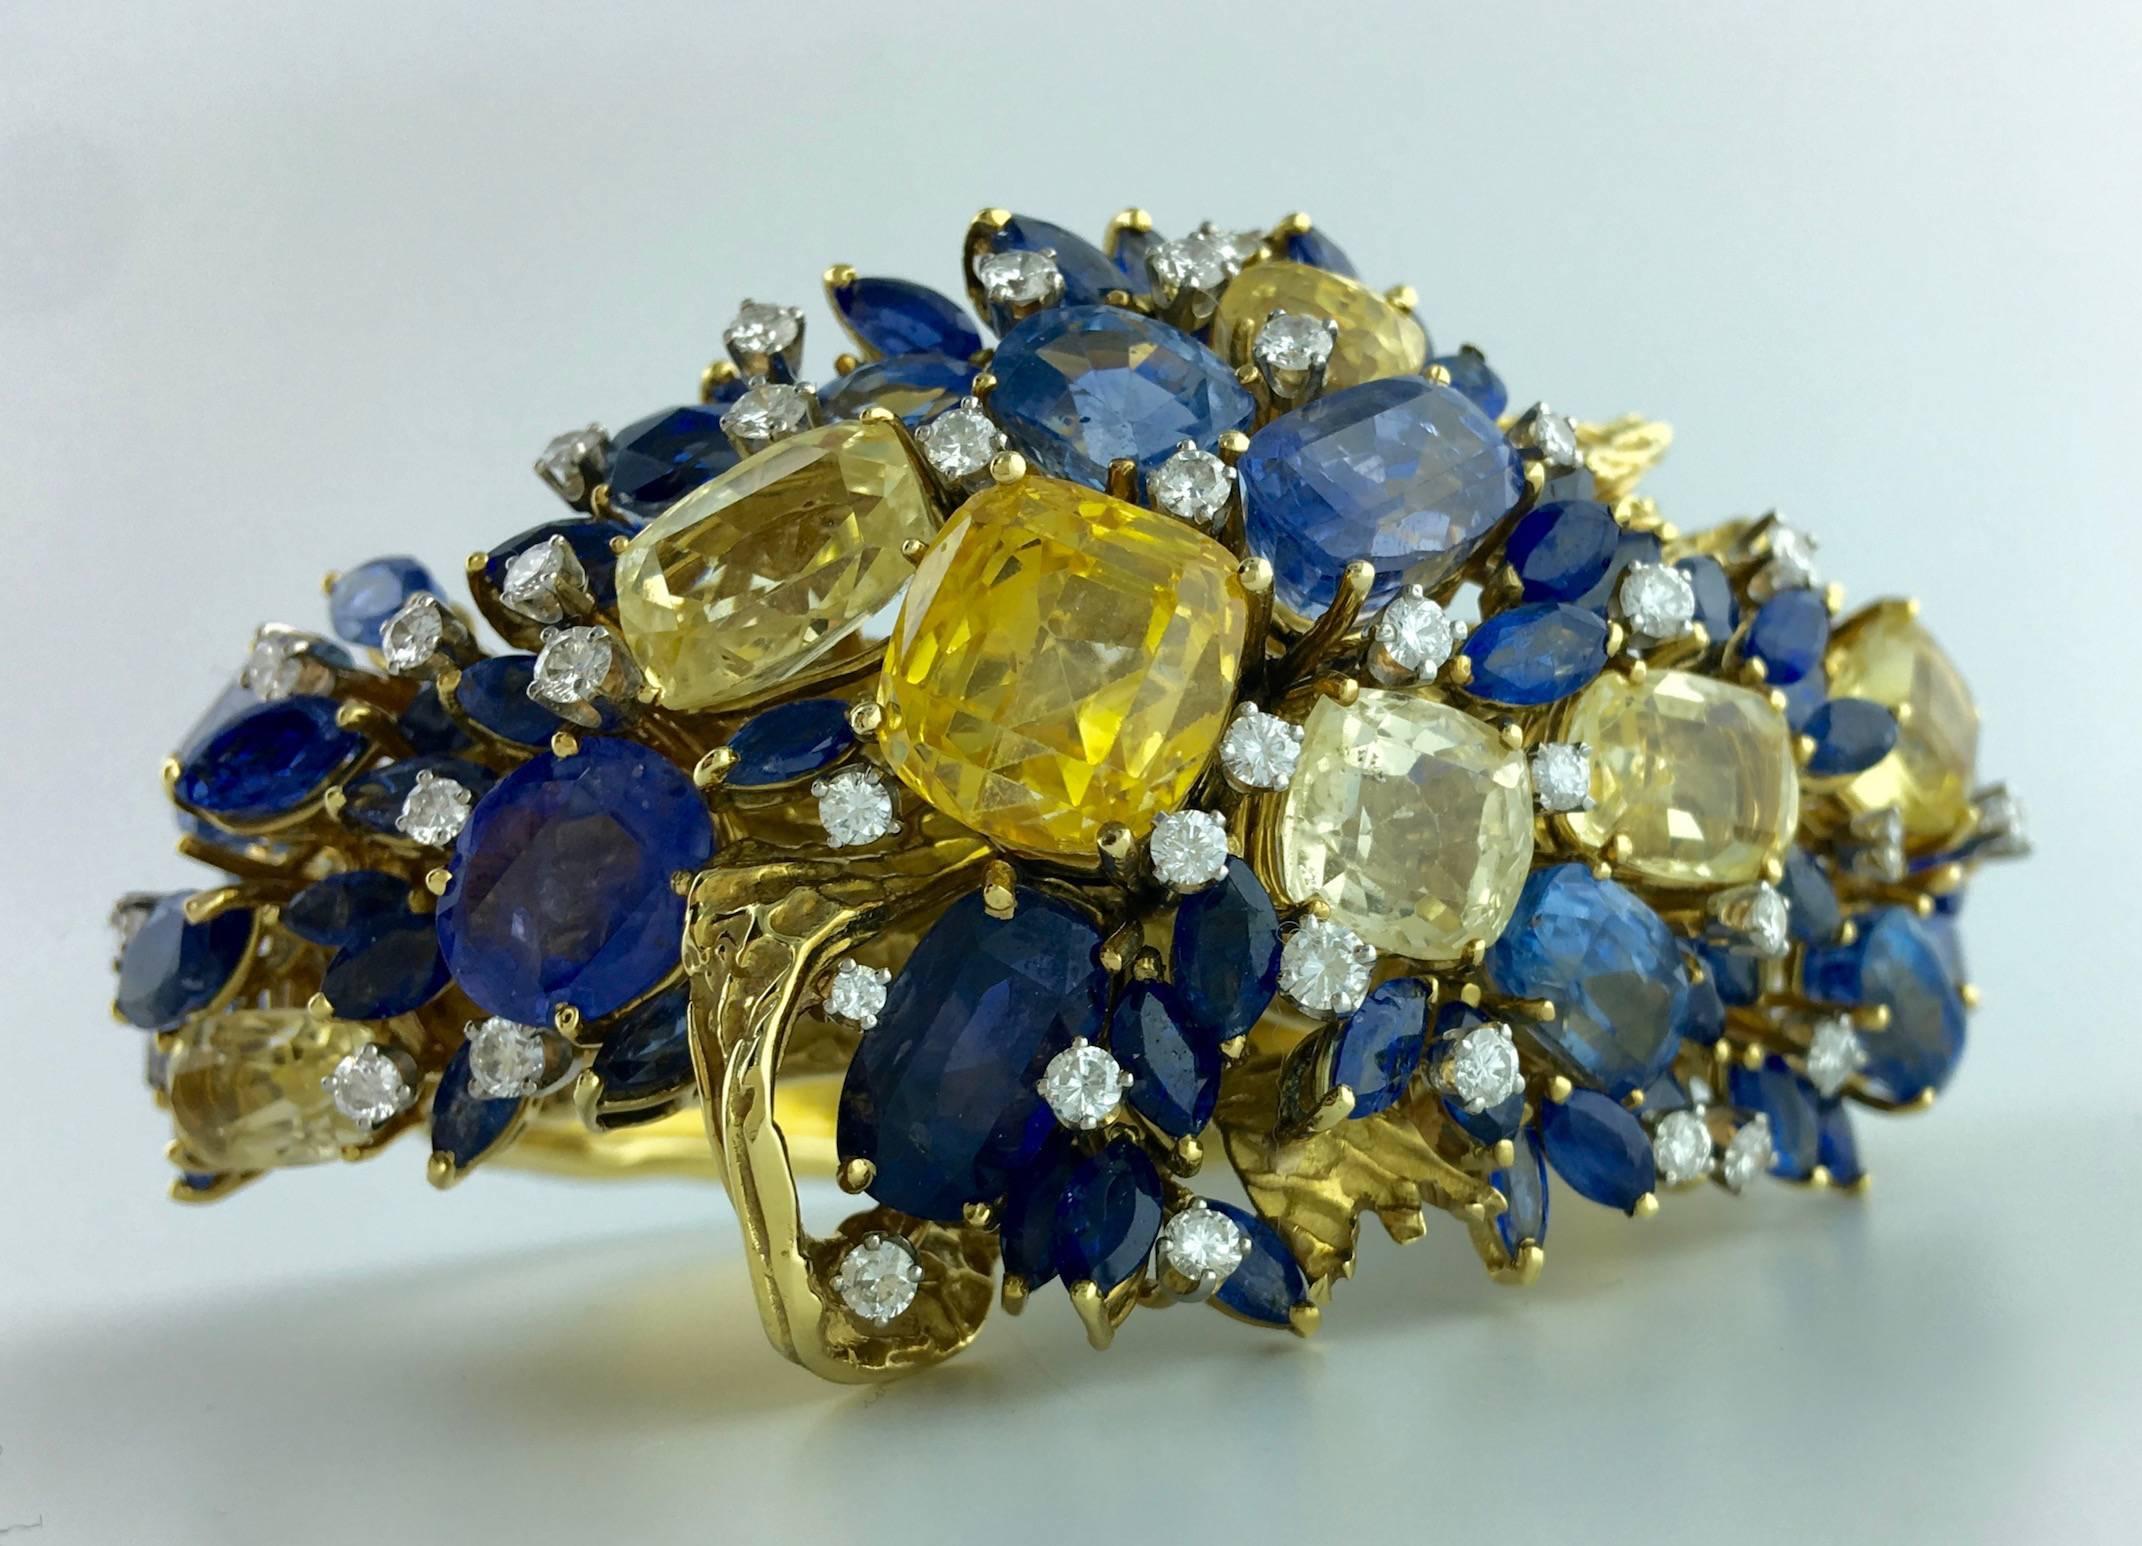 Unbelievable!
Designed as a floral cluster of cushion, oval and marquise-shaped sapphires of various blue and yellow hues, accented by round diamonds, on a textured gold 18k hinged bangle. 
American jewel reminding the work of jewellers as